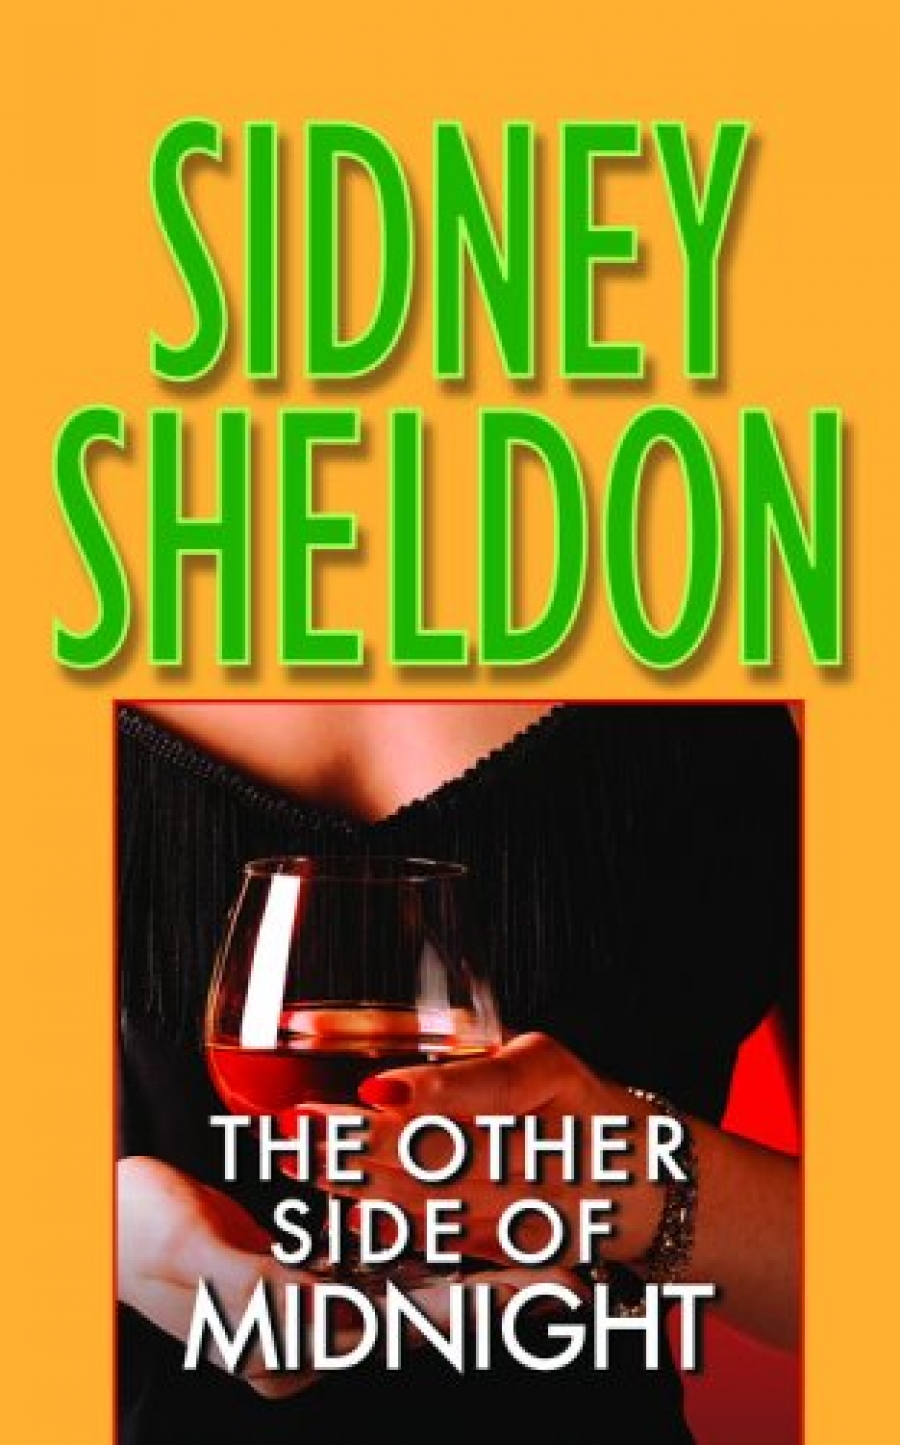 Sheldon Sidney The Other Side of Midnight 